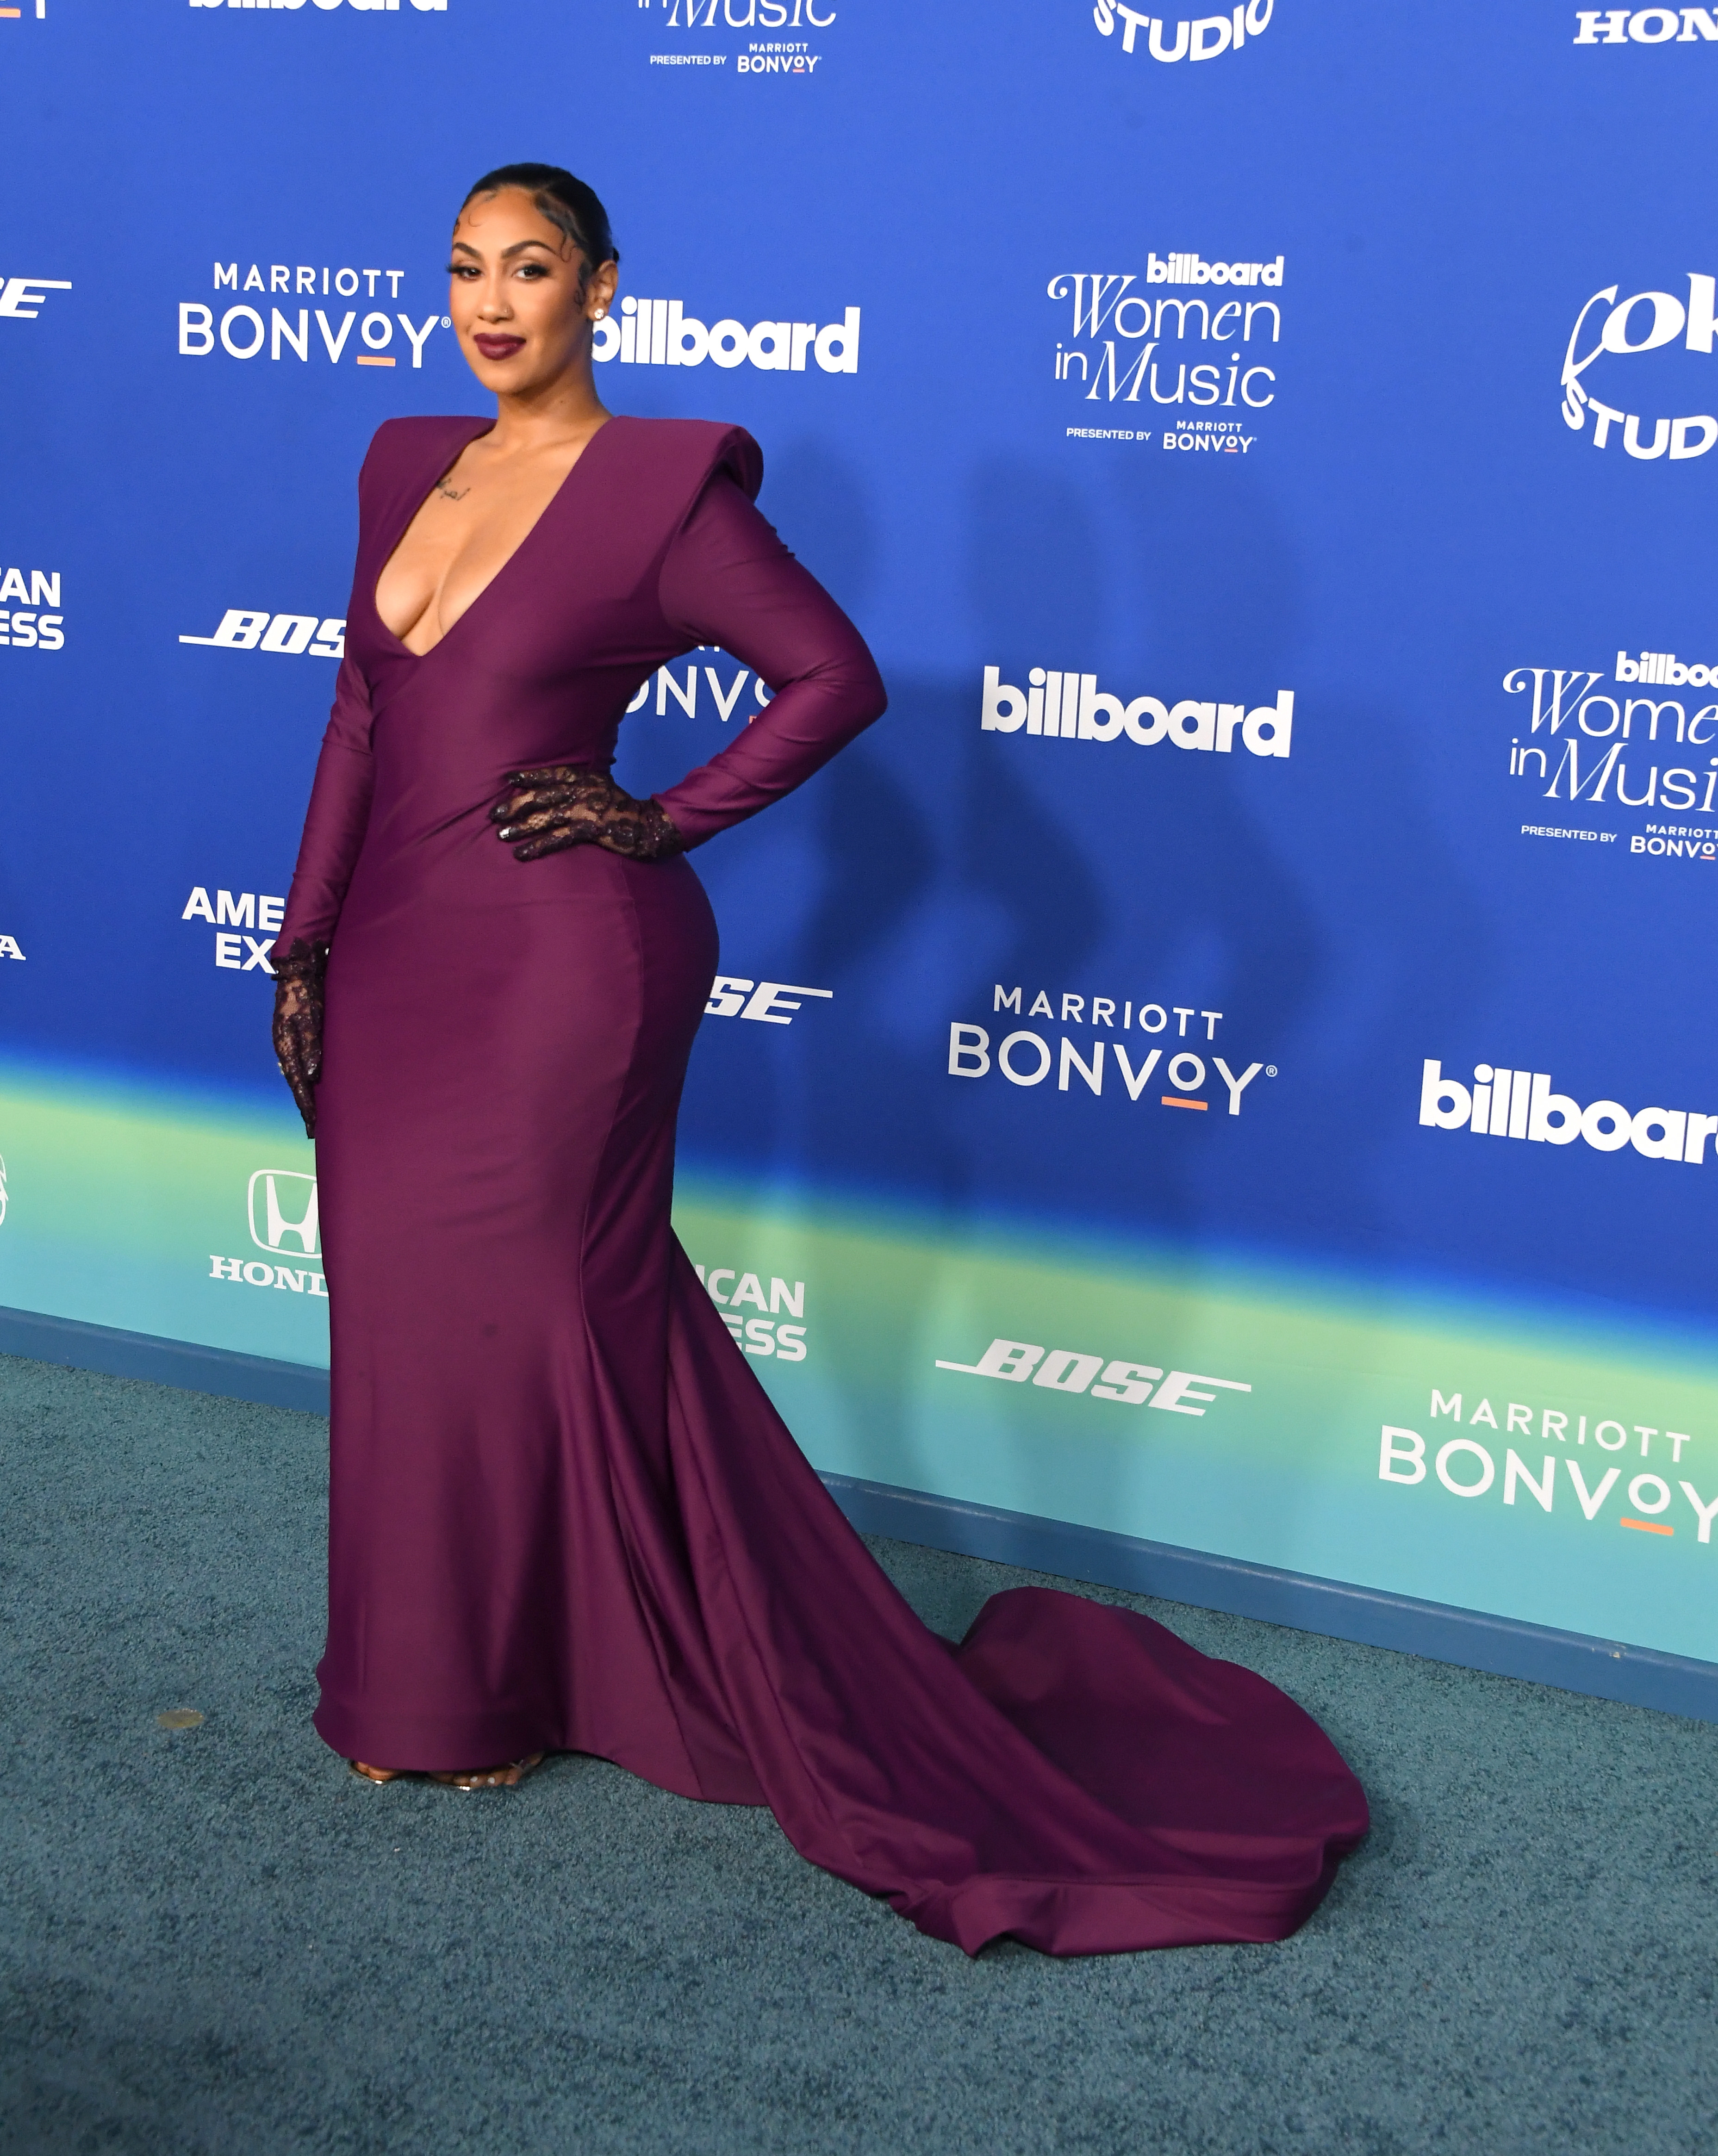 She&#x27;s in a long-sleeve gown with a plunging neckline and train